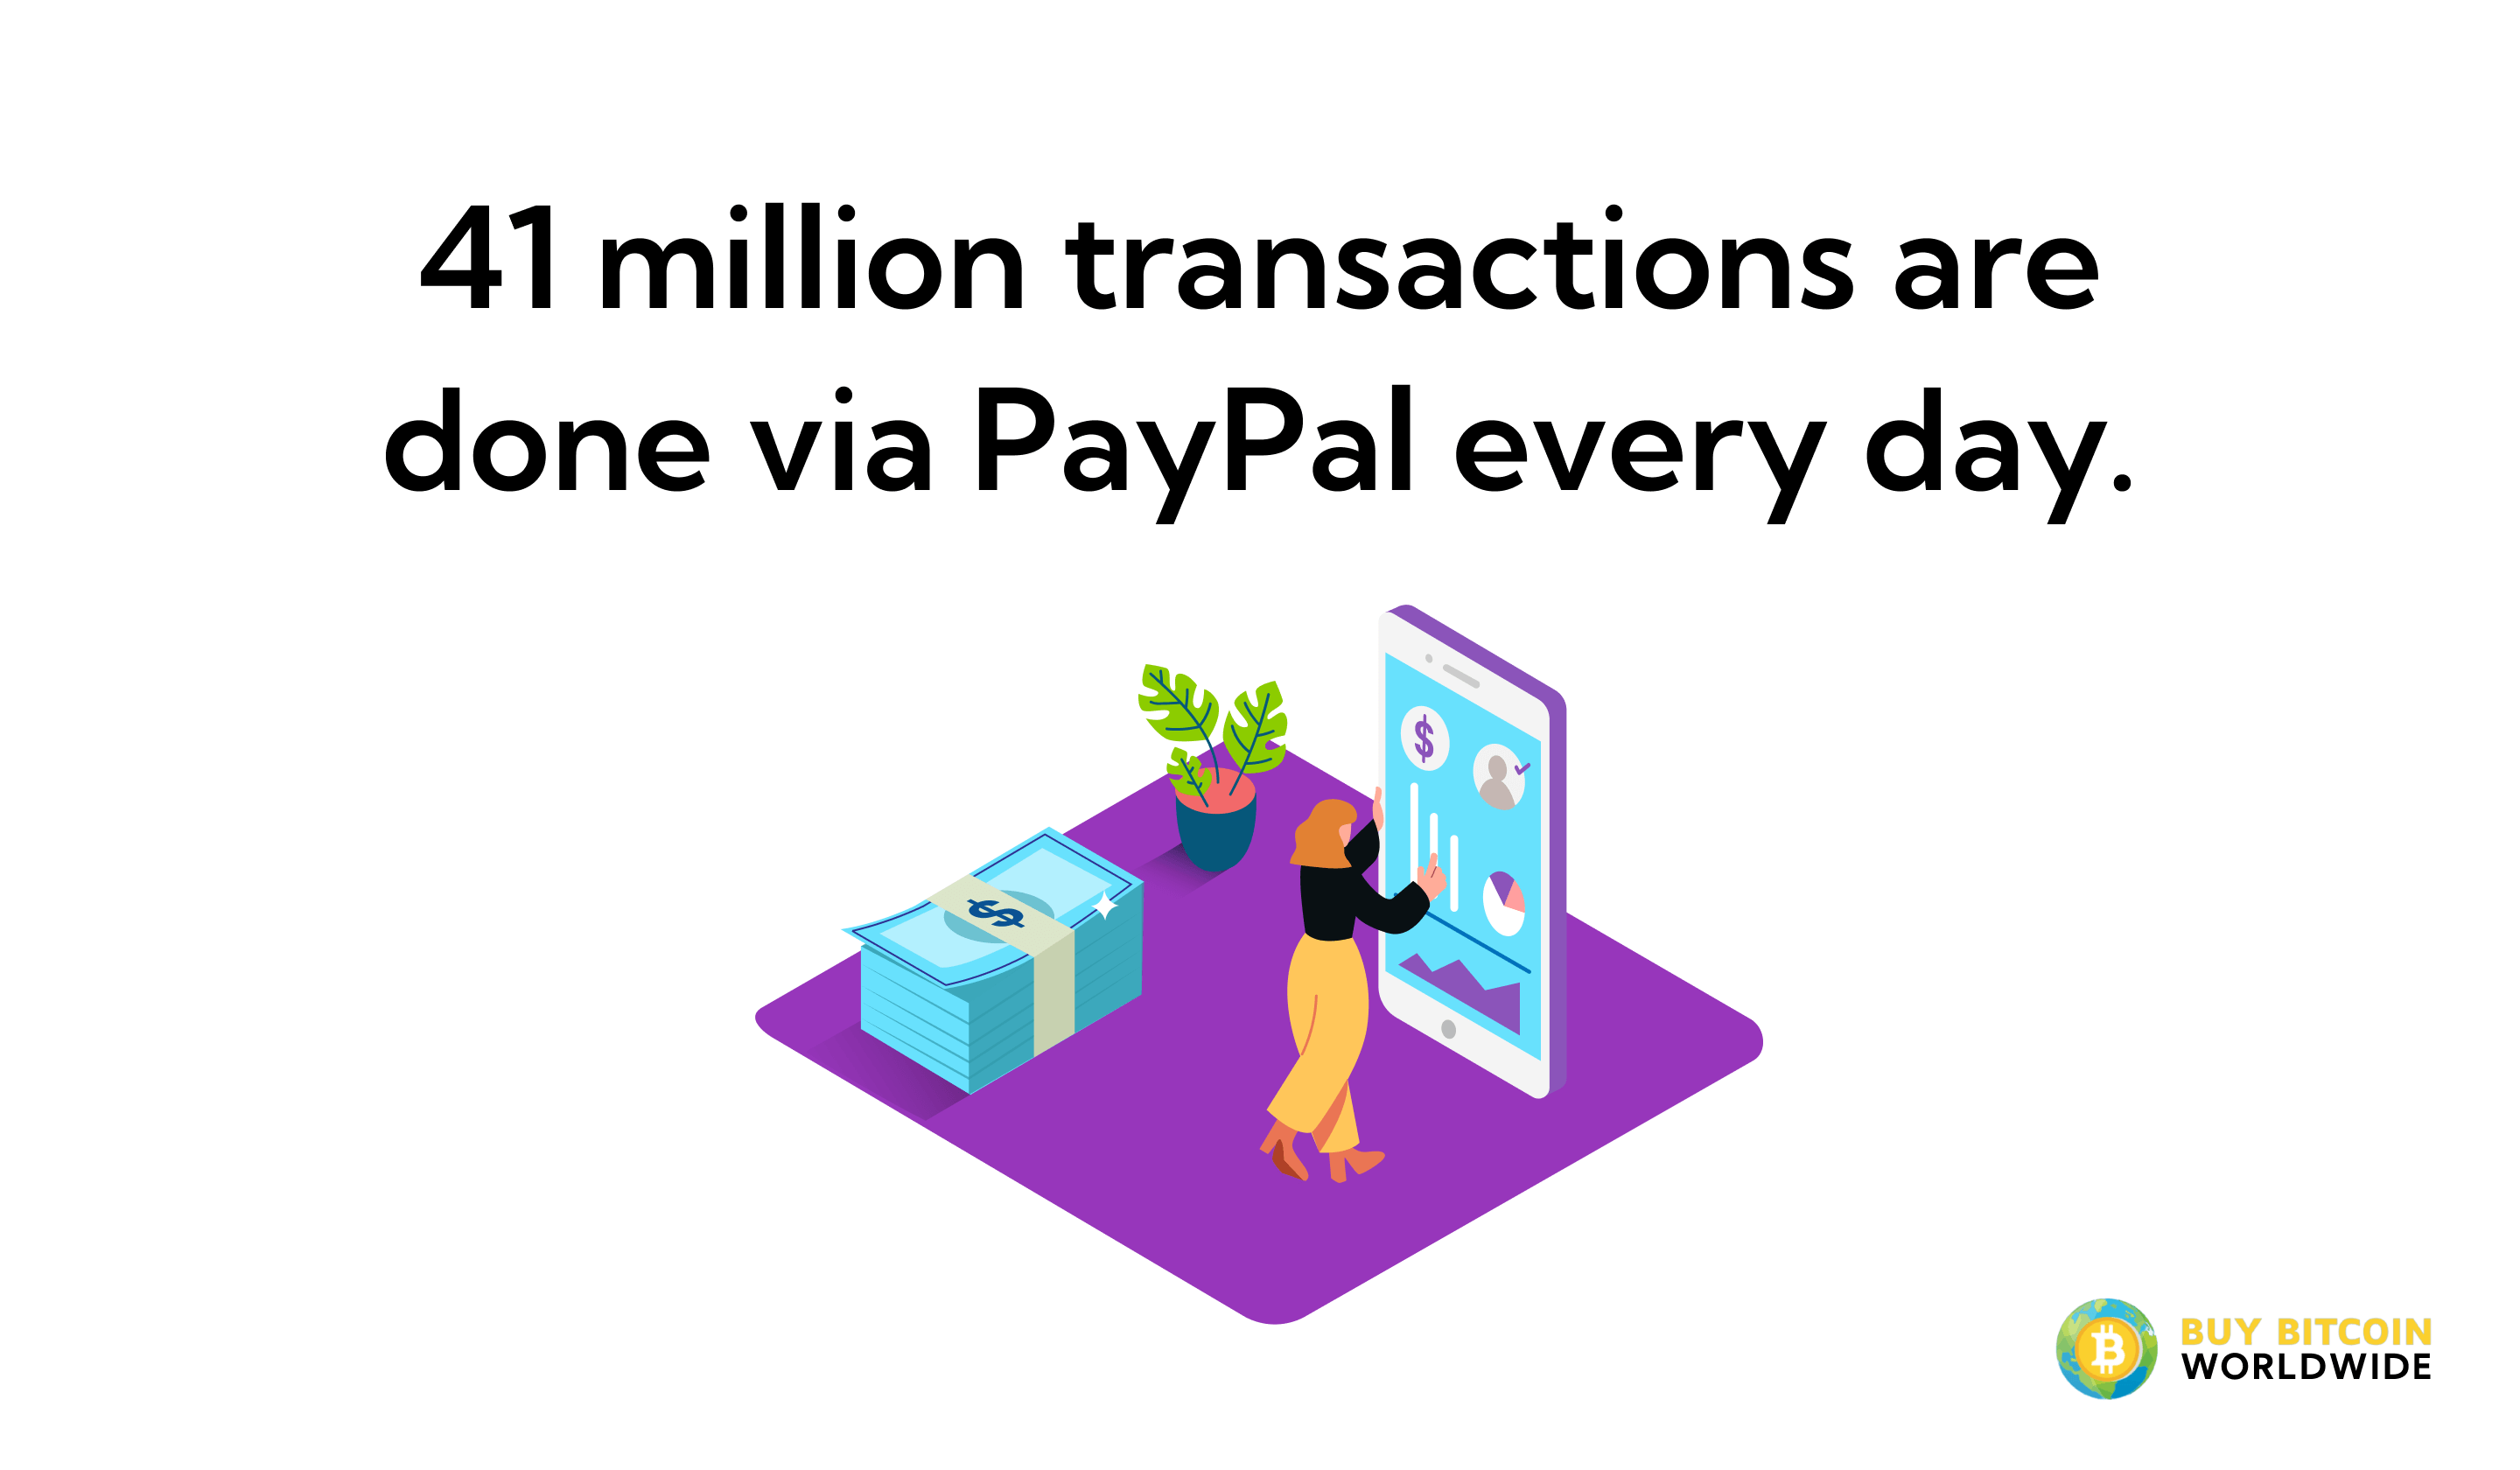 paypal transactions completed everyday